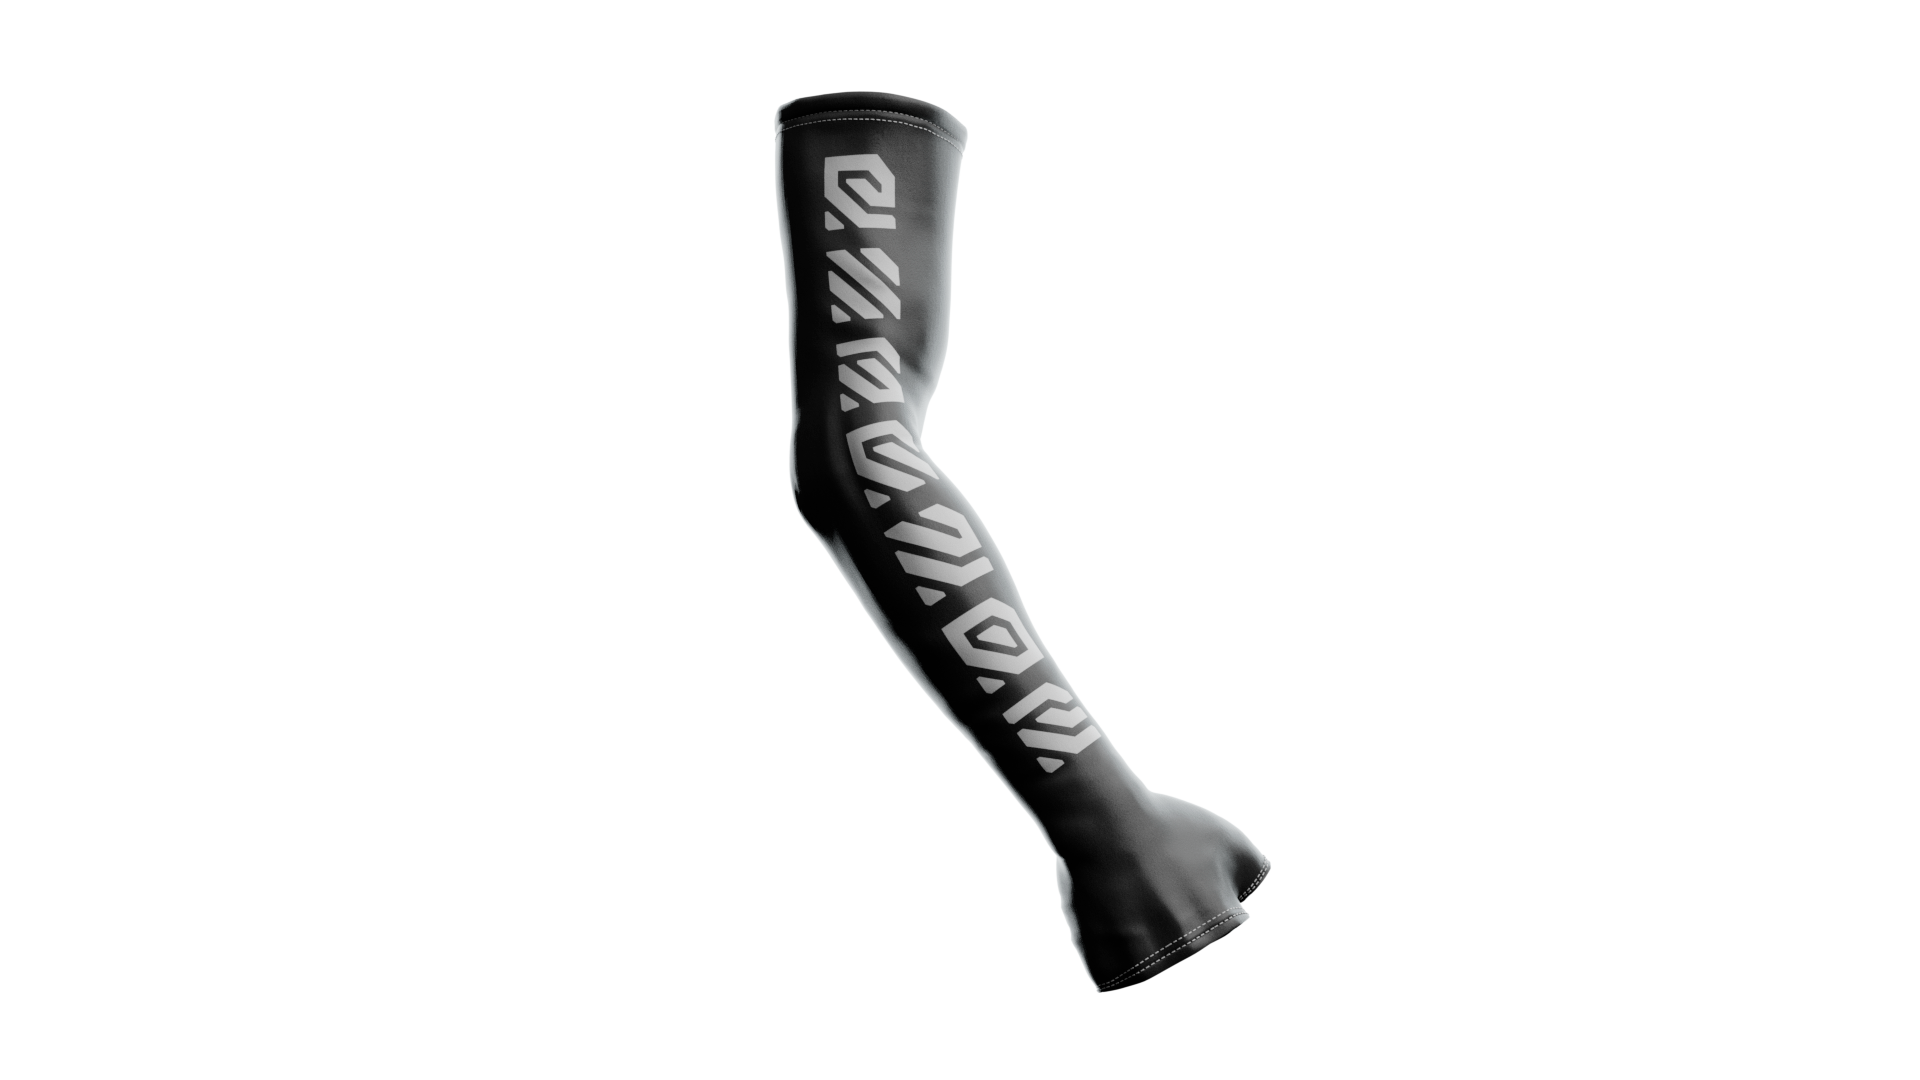 A black and white color gaming compression arm sleeve with glove